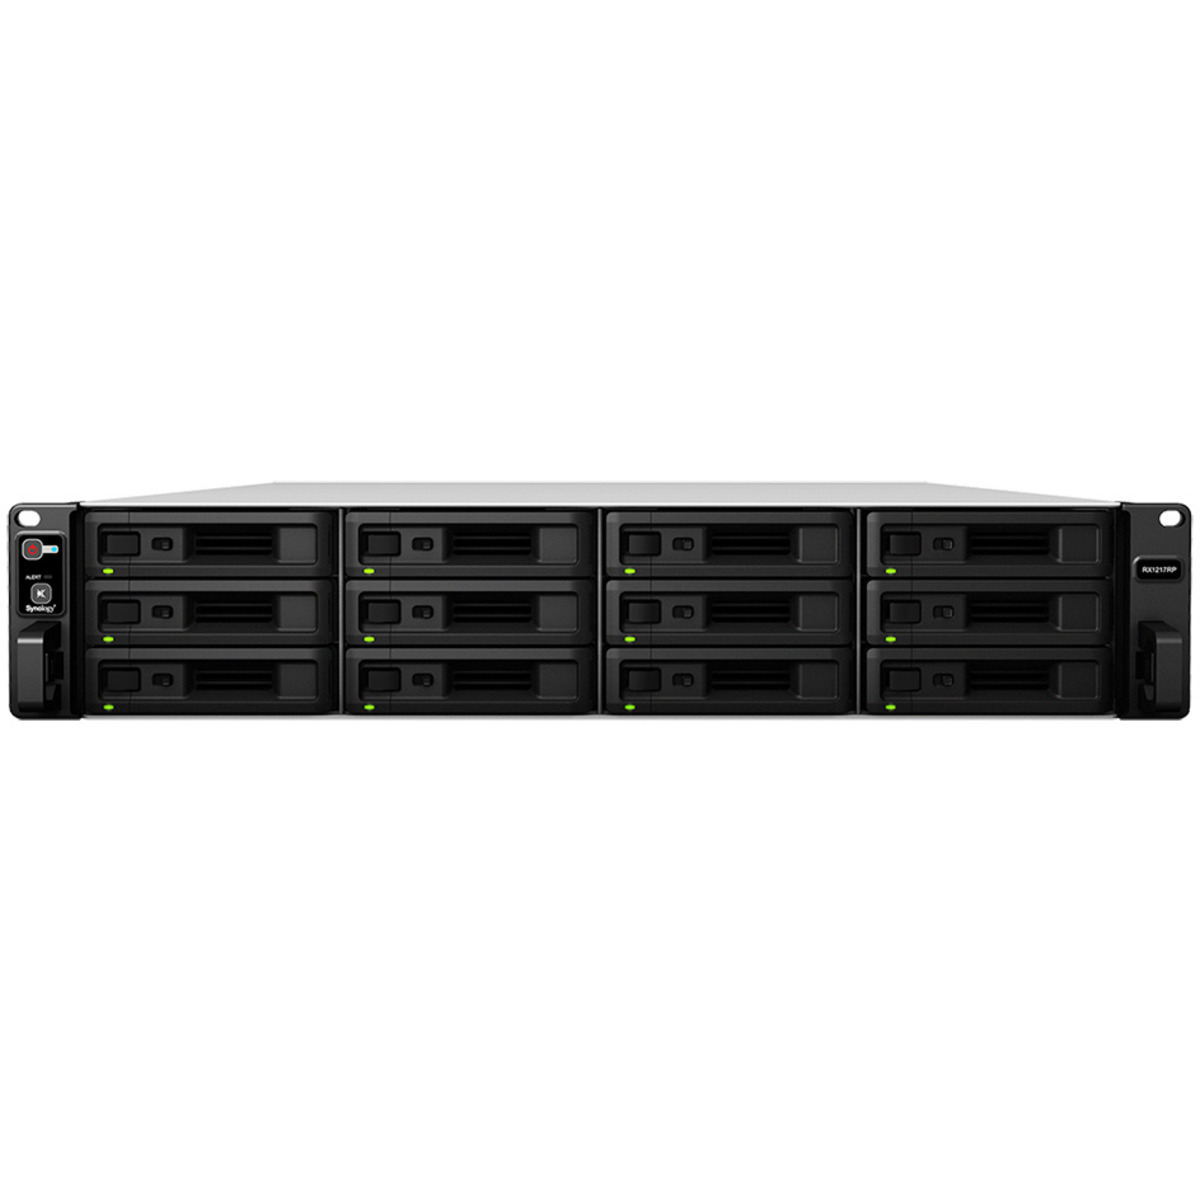 Synology RX1217 External Expansion Drive 28tb 12-Bay RackMount Large Business / Enterprise Expansion Enclosure 7x4tb Samsung 870 EVO MZ-77E4T0BAM 2.5 560/530MB/s SATA 6Gb/s SSD CONSUMER Class Drives Installed - Burn-In Tested - ON SALE RX1217 External Expansion Drive